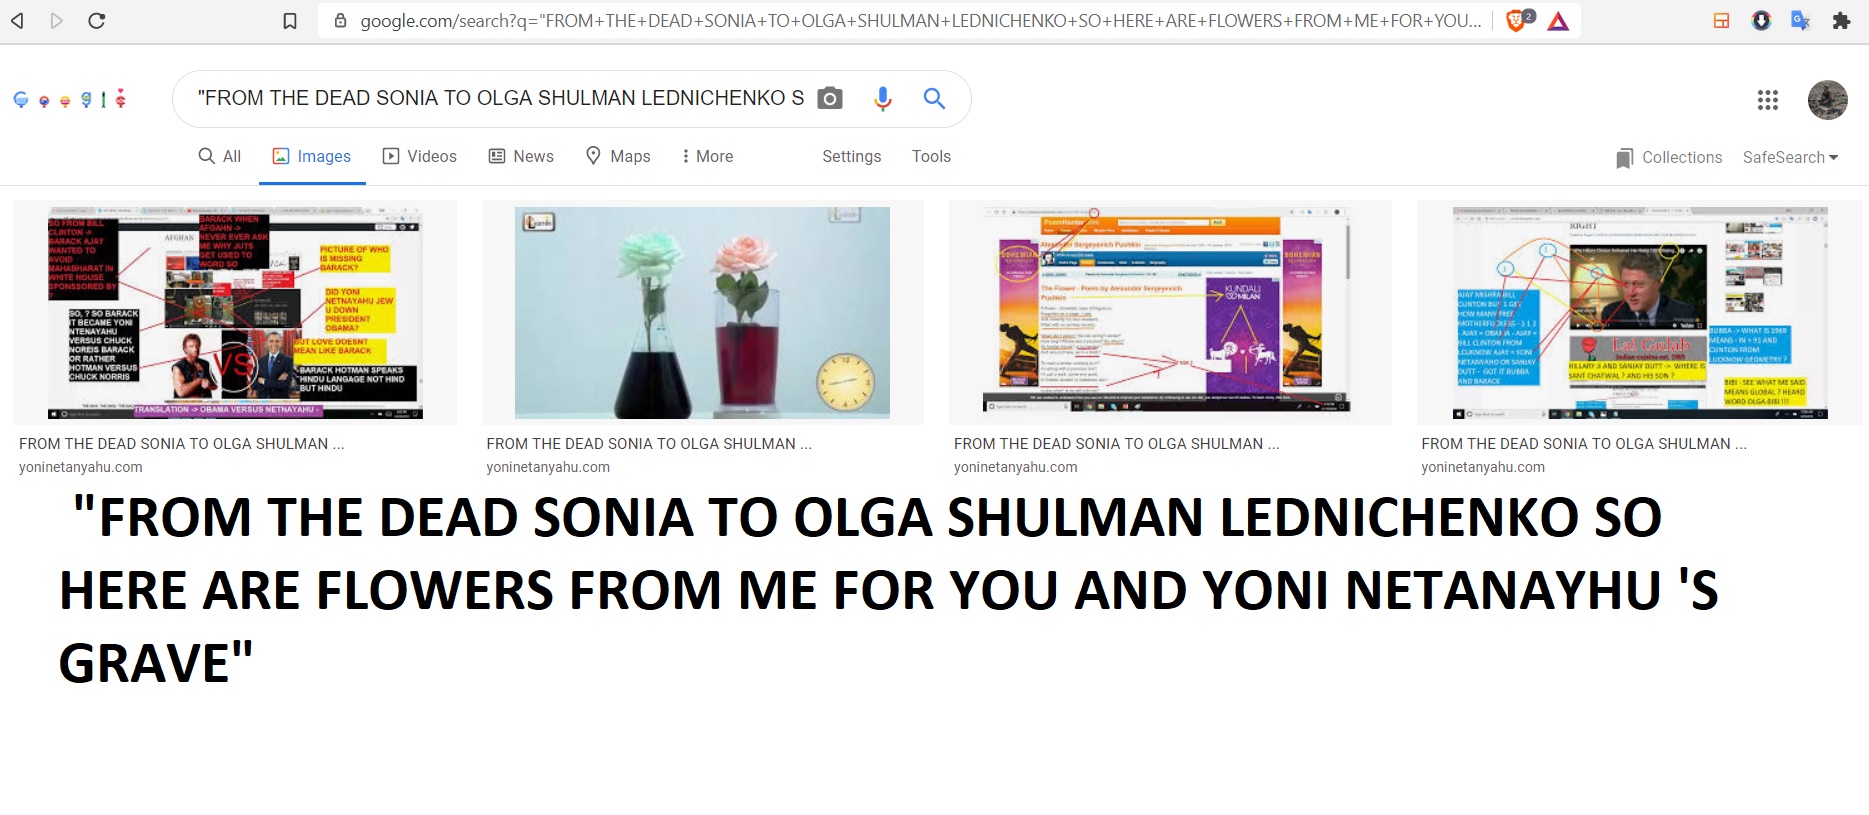 FROM THE DEAD SONIA TO OLGA SHULMAN LEDNICHENKO SO HERE ARE FLOWERS FROM ME FOR YOU AND YONI NETANAYHU 'S GRAVE